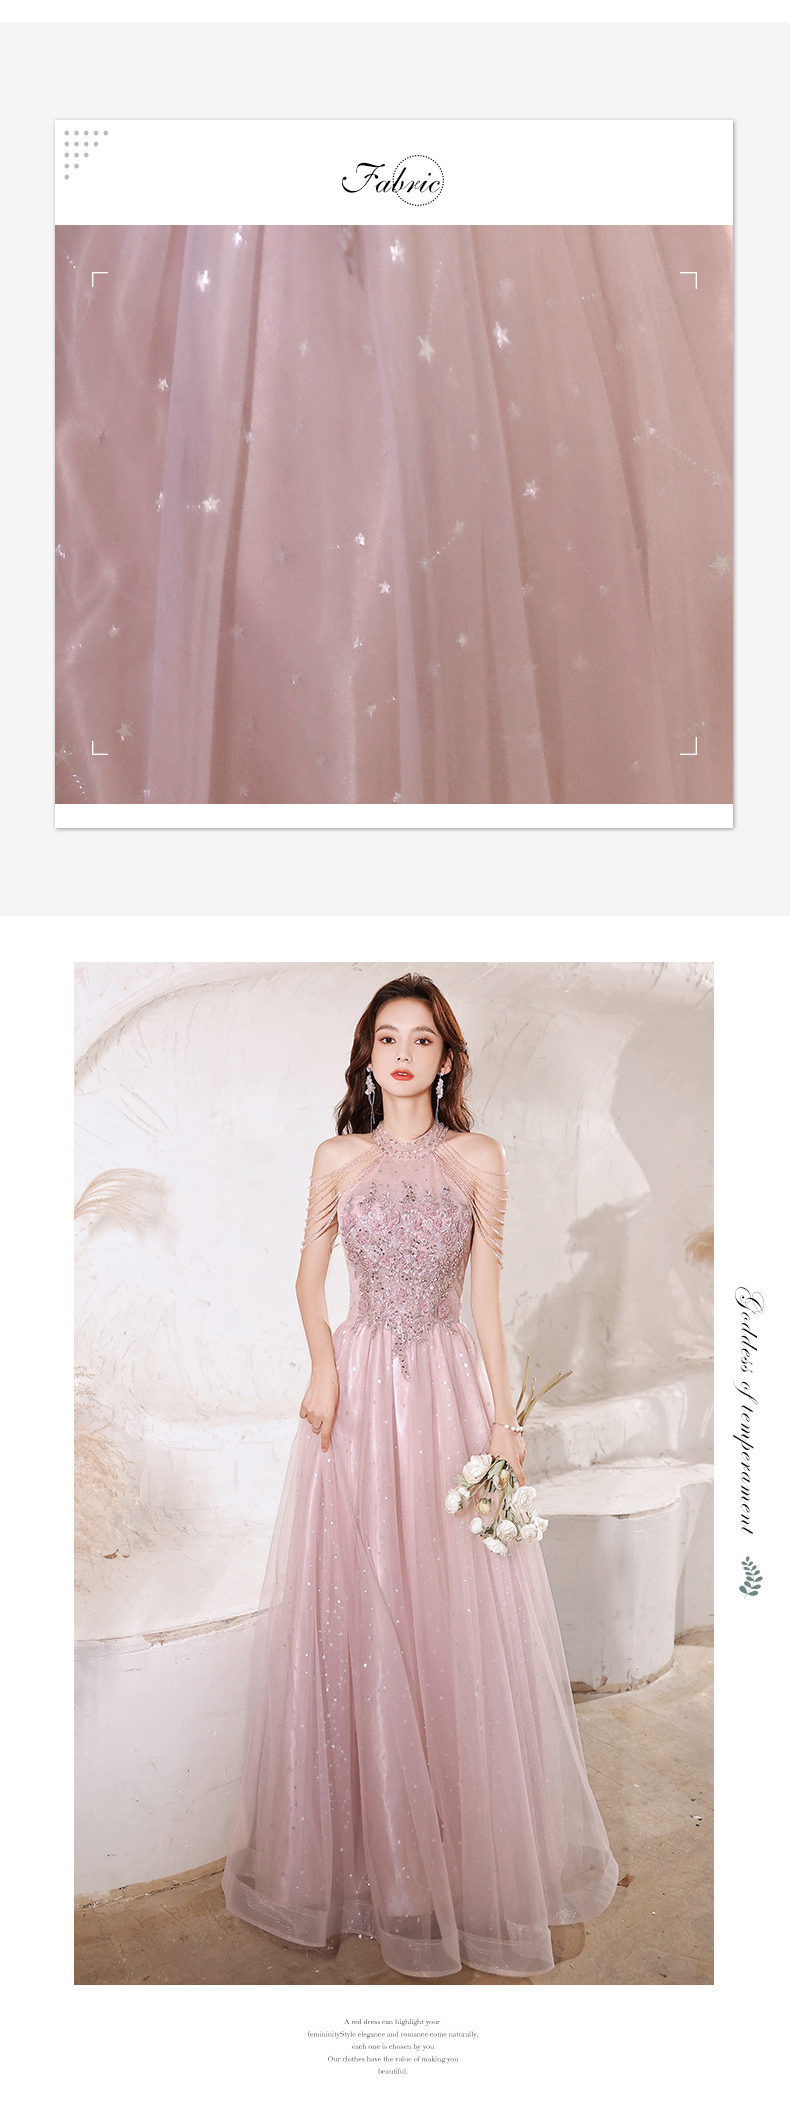 Elegant Pink Tulle Evening Gown Long Formal Prom Party Dress12